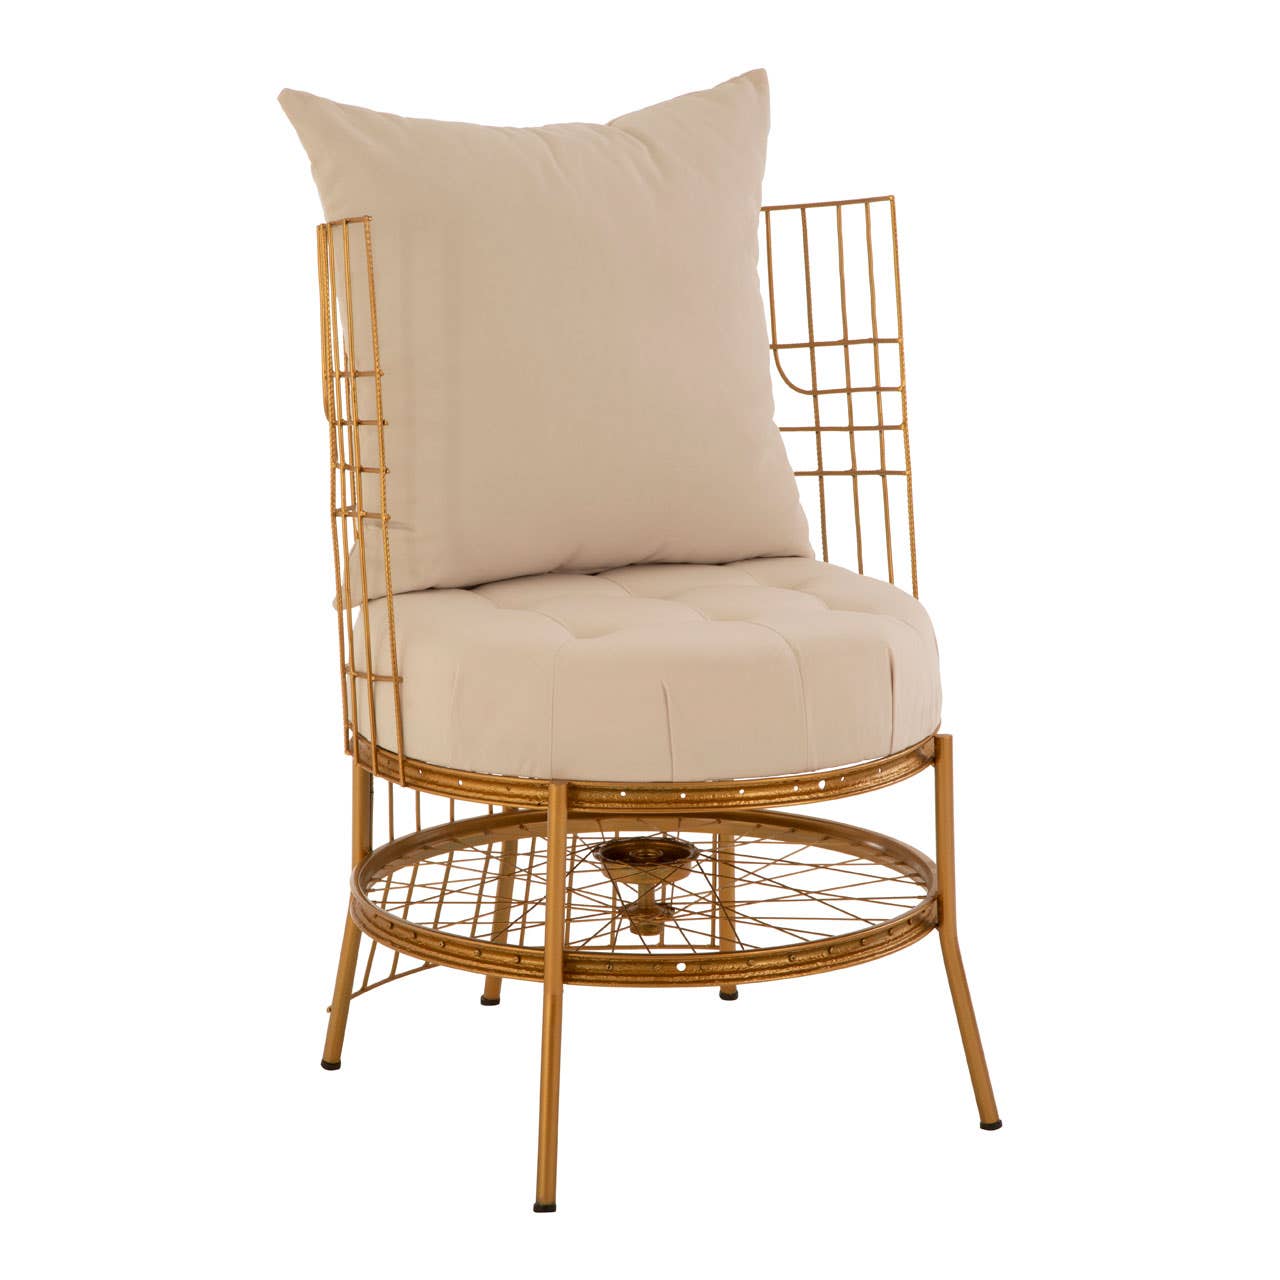 Mantis Gold Finish Chair With Cushion